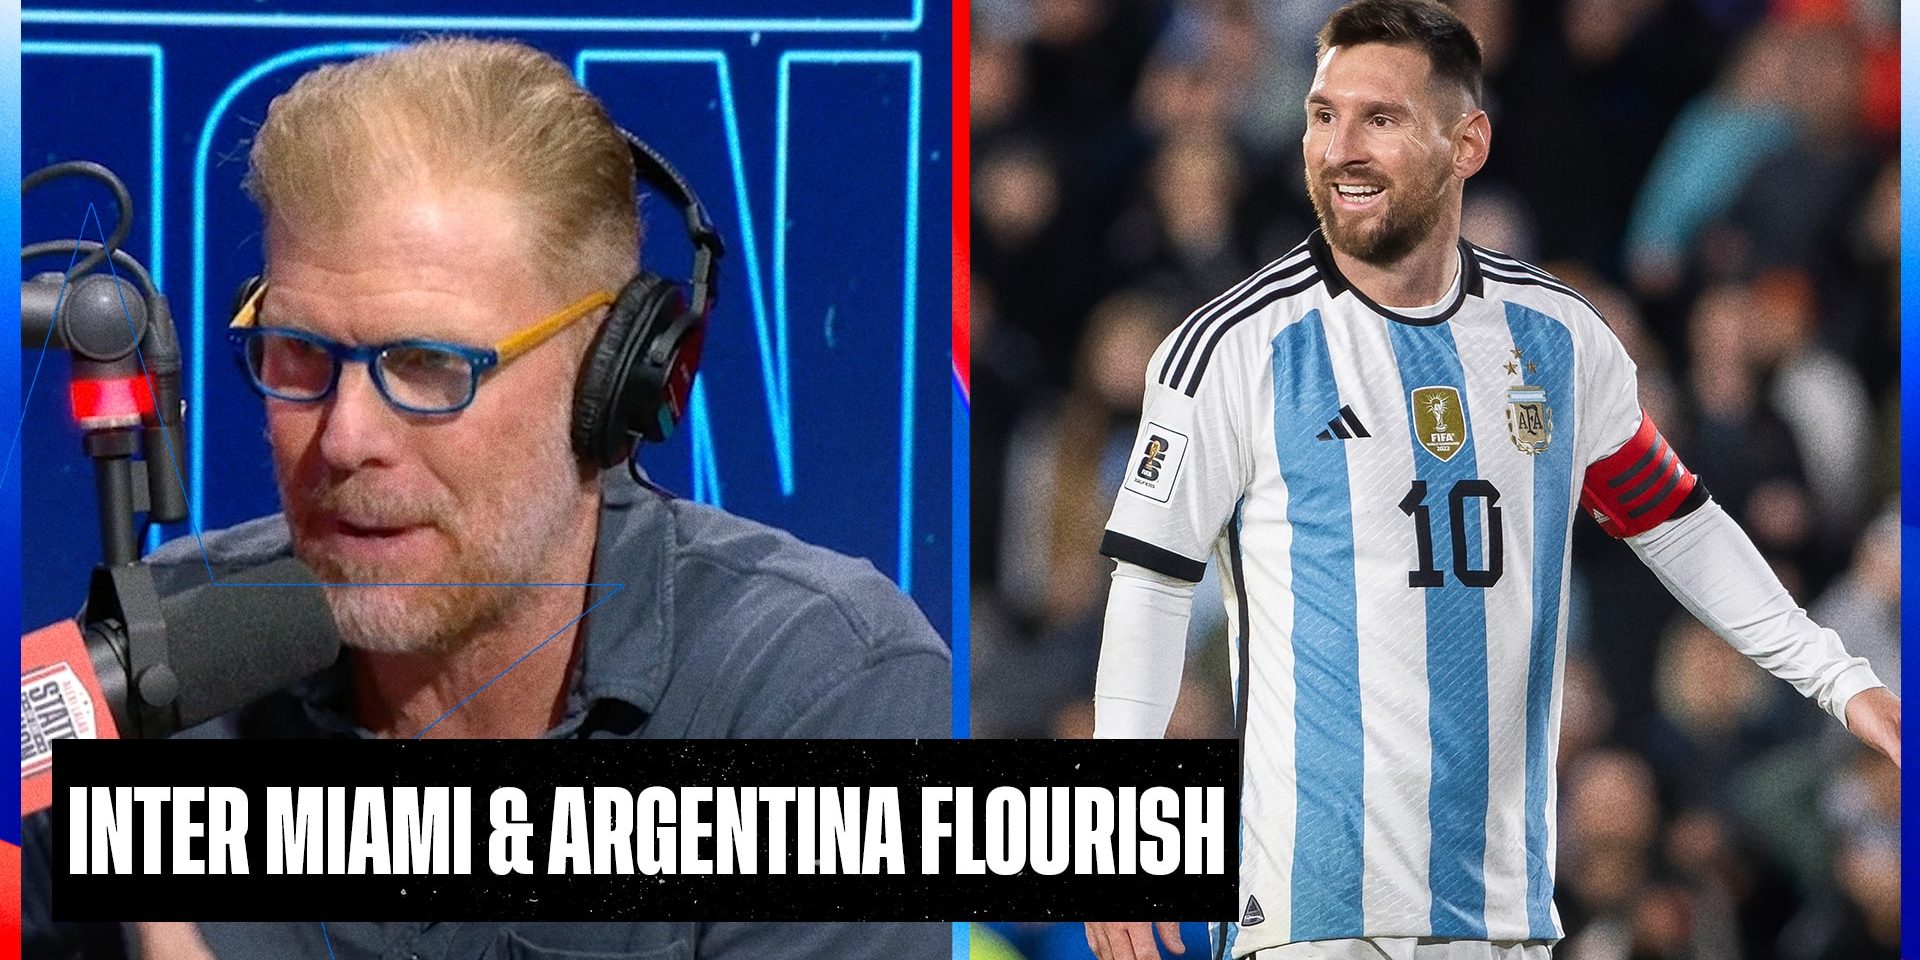 Inter Miami is cruising without Messi, and Argentina is flourishing with Messi | SOTU